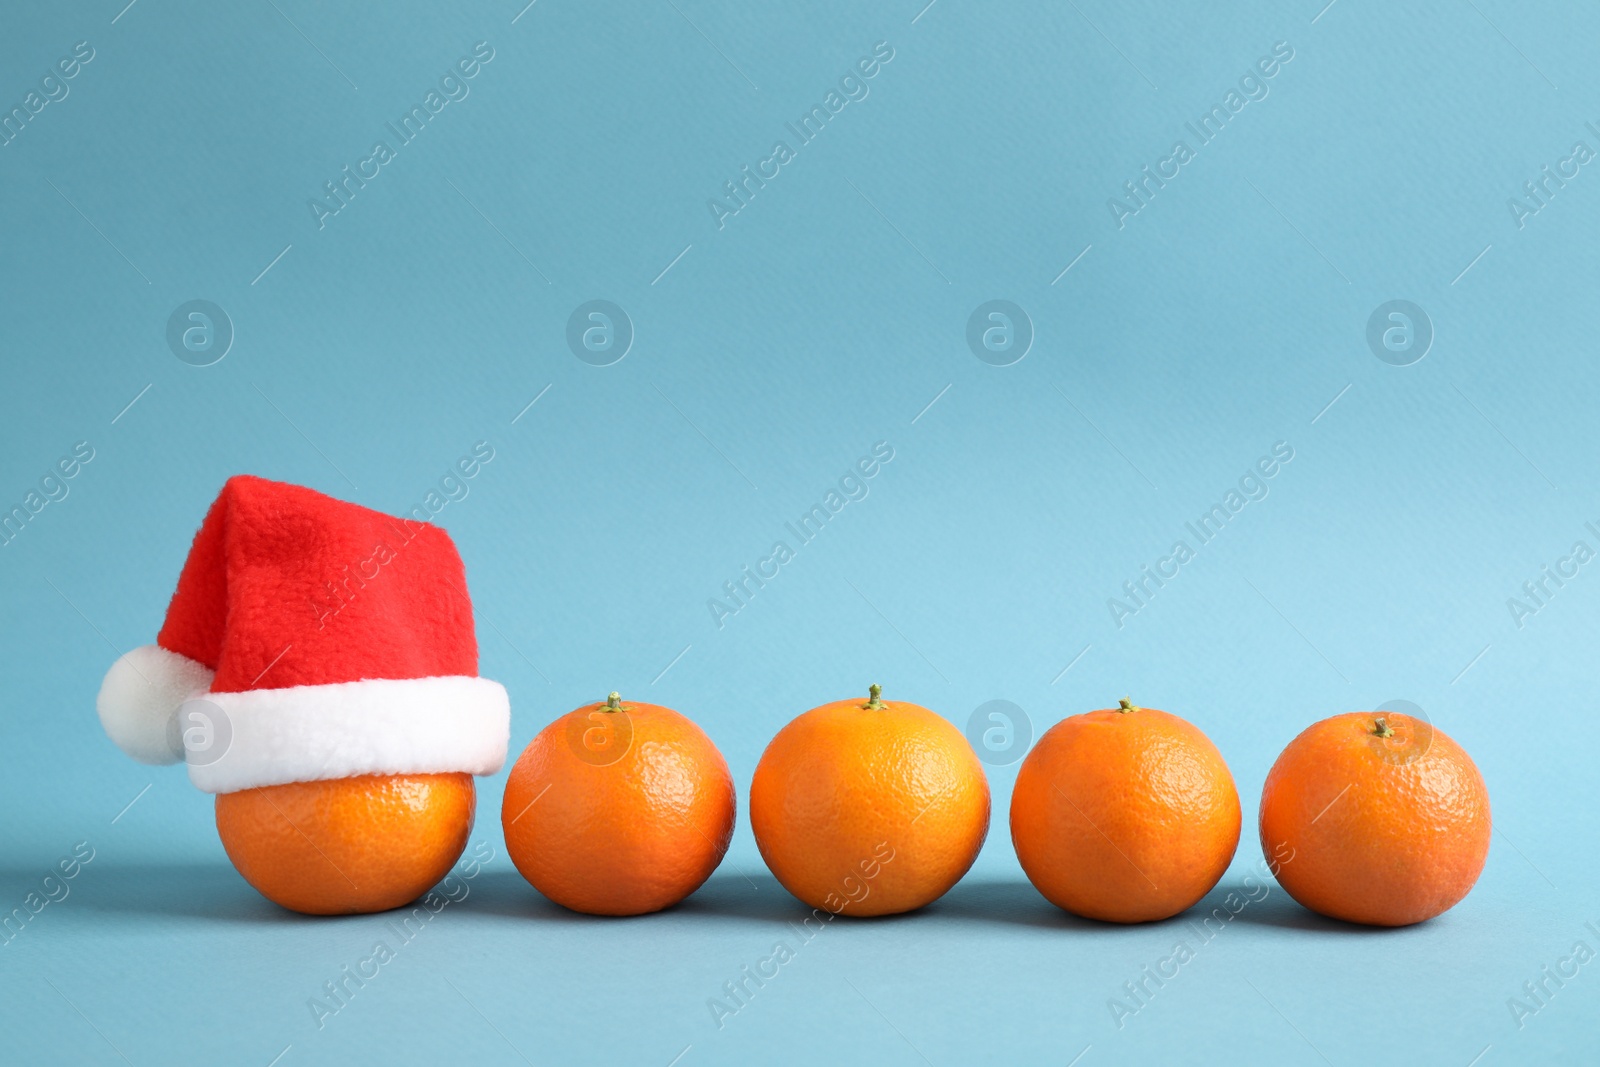 Photo of Row of fresh tangerines and one with Christmas hat against light blue background. Space for text